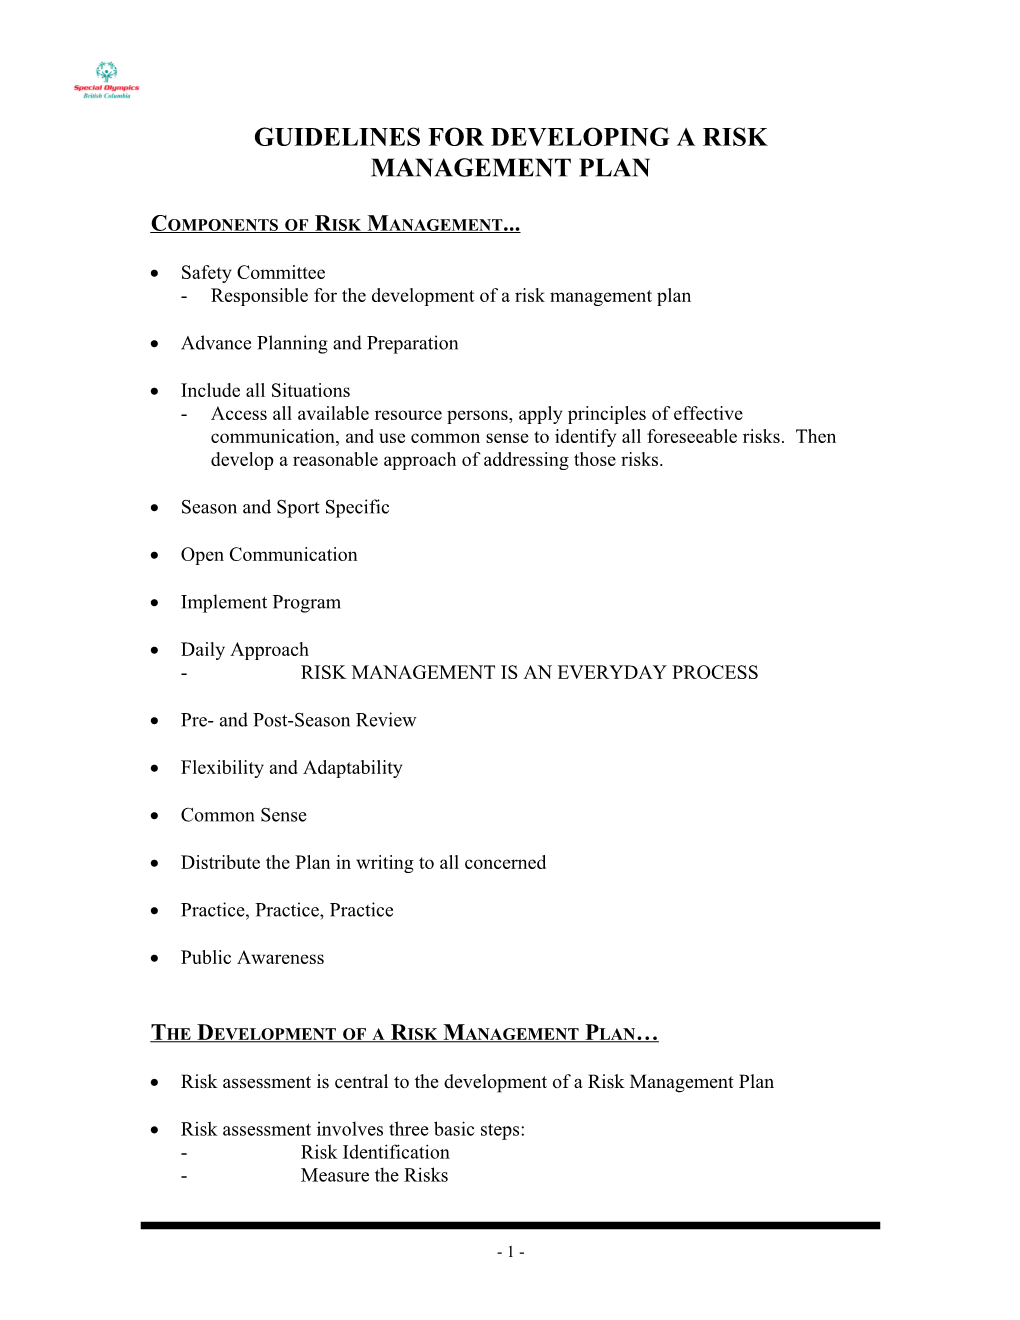 Components of Risk Management